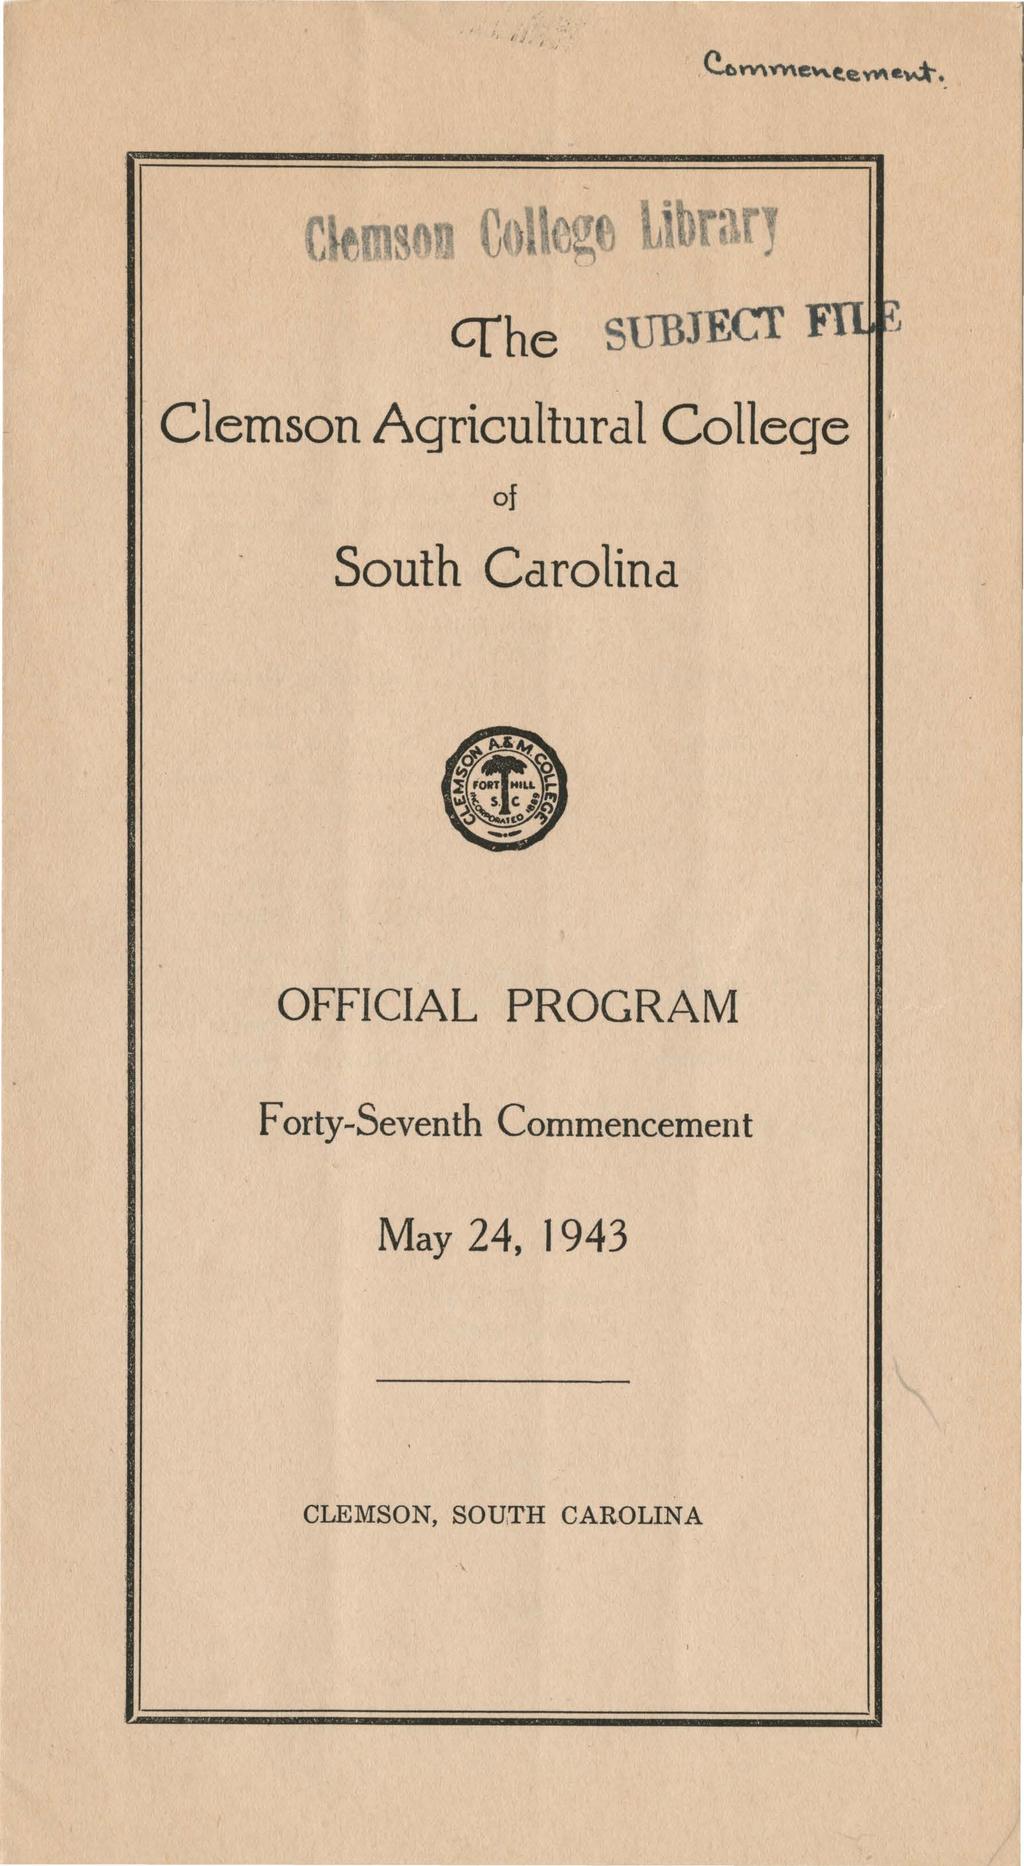 c Cfhe SUBJEGr F Clemson Agricultural College of South Carolina